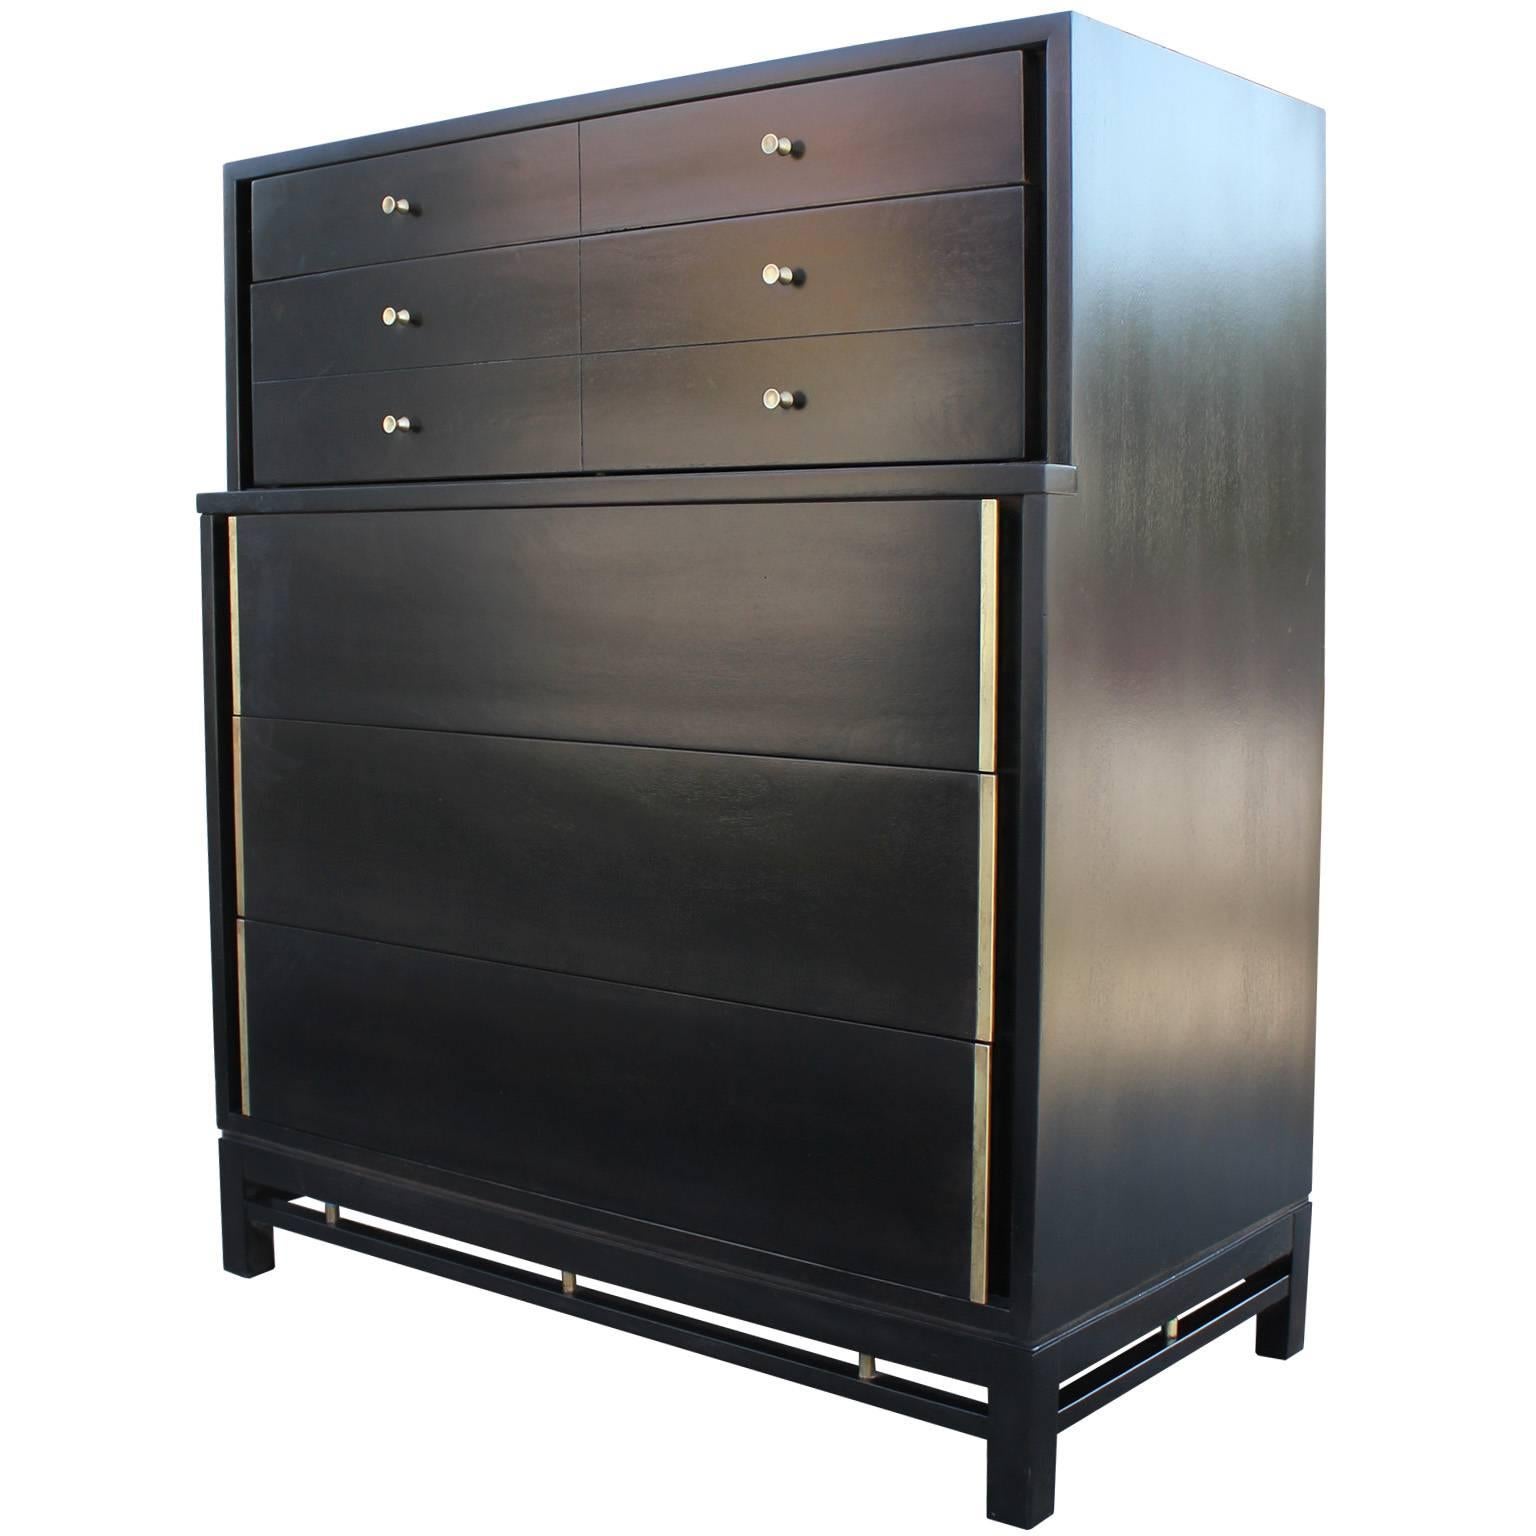 Stunning chest by American of Martinsville. Dresser is finished in a dark ebony stain in satin. Delicately polished brass adds wonderful contrast. Negative space along base adds visual interest. Five large drawers provide ample storage. Top three